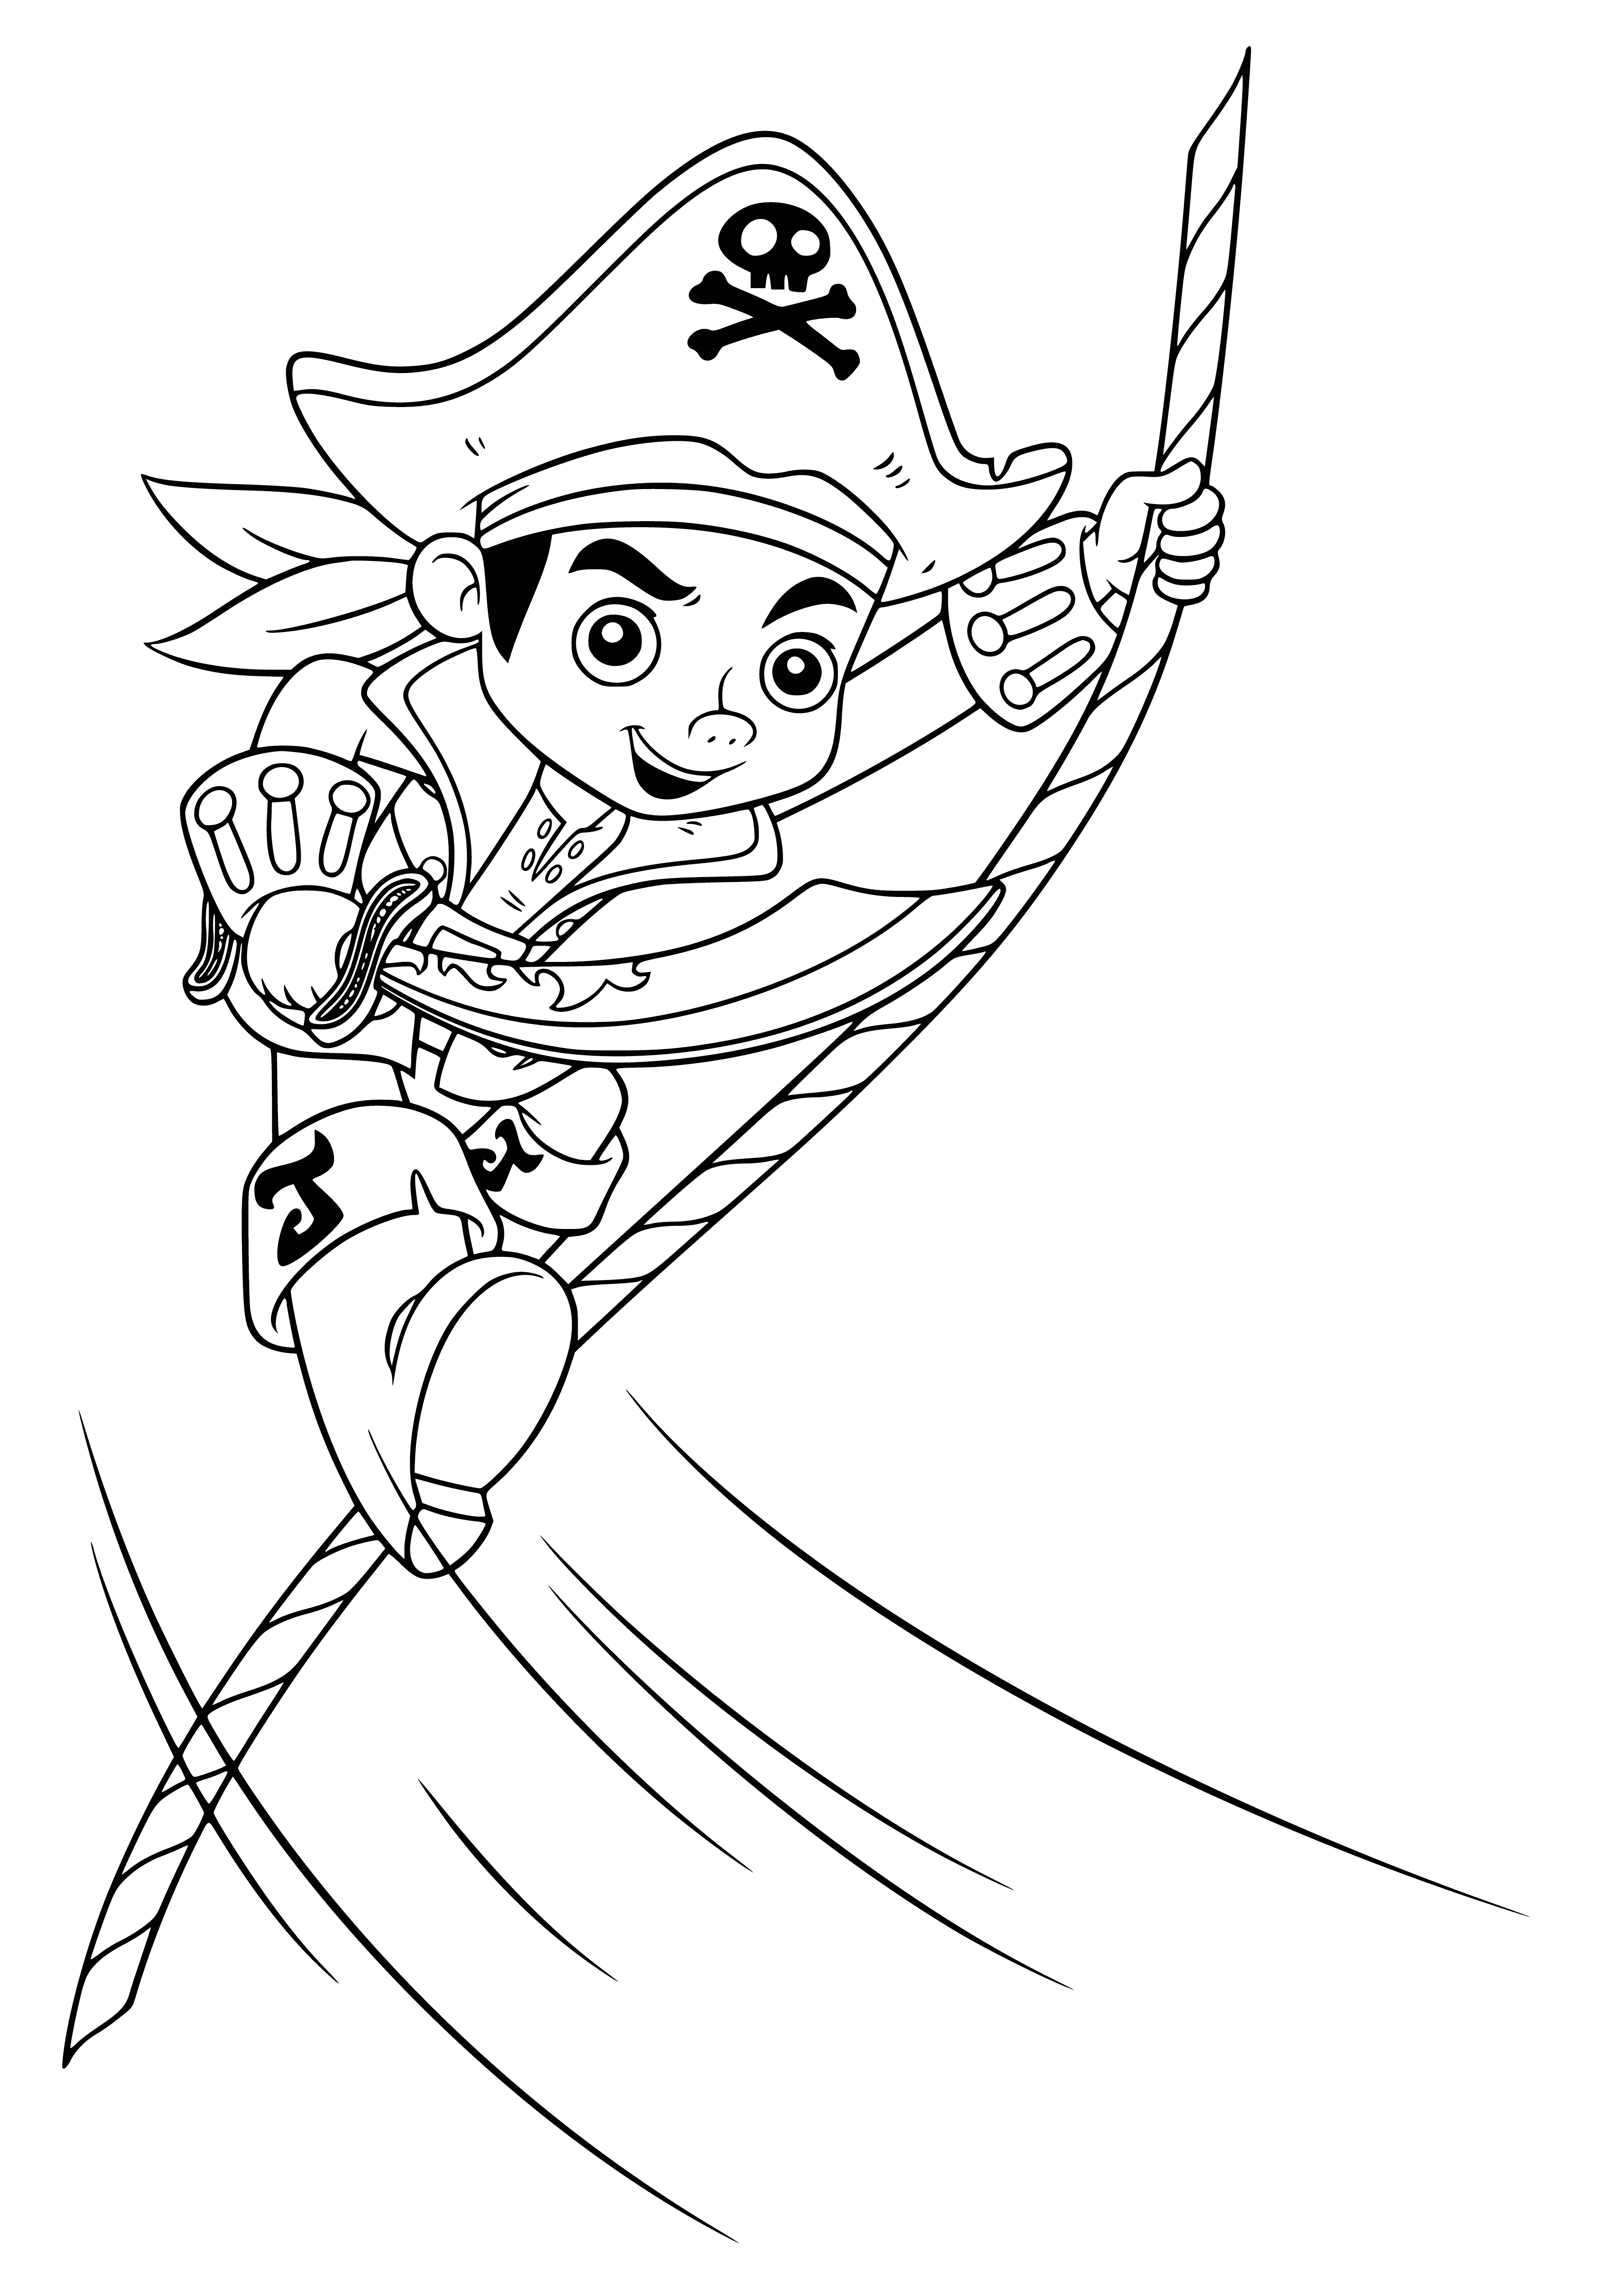 coloring page: Jake is a daring pirate who leads a brave crew in search of adventure aboard their Never Land pirate ship!